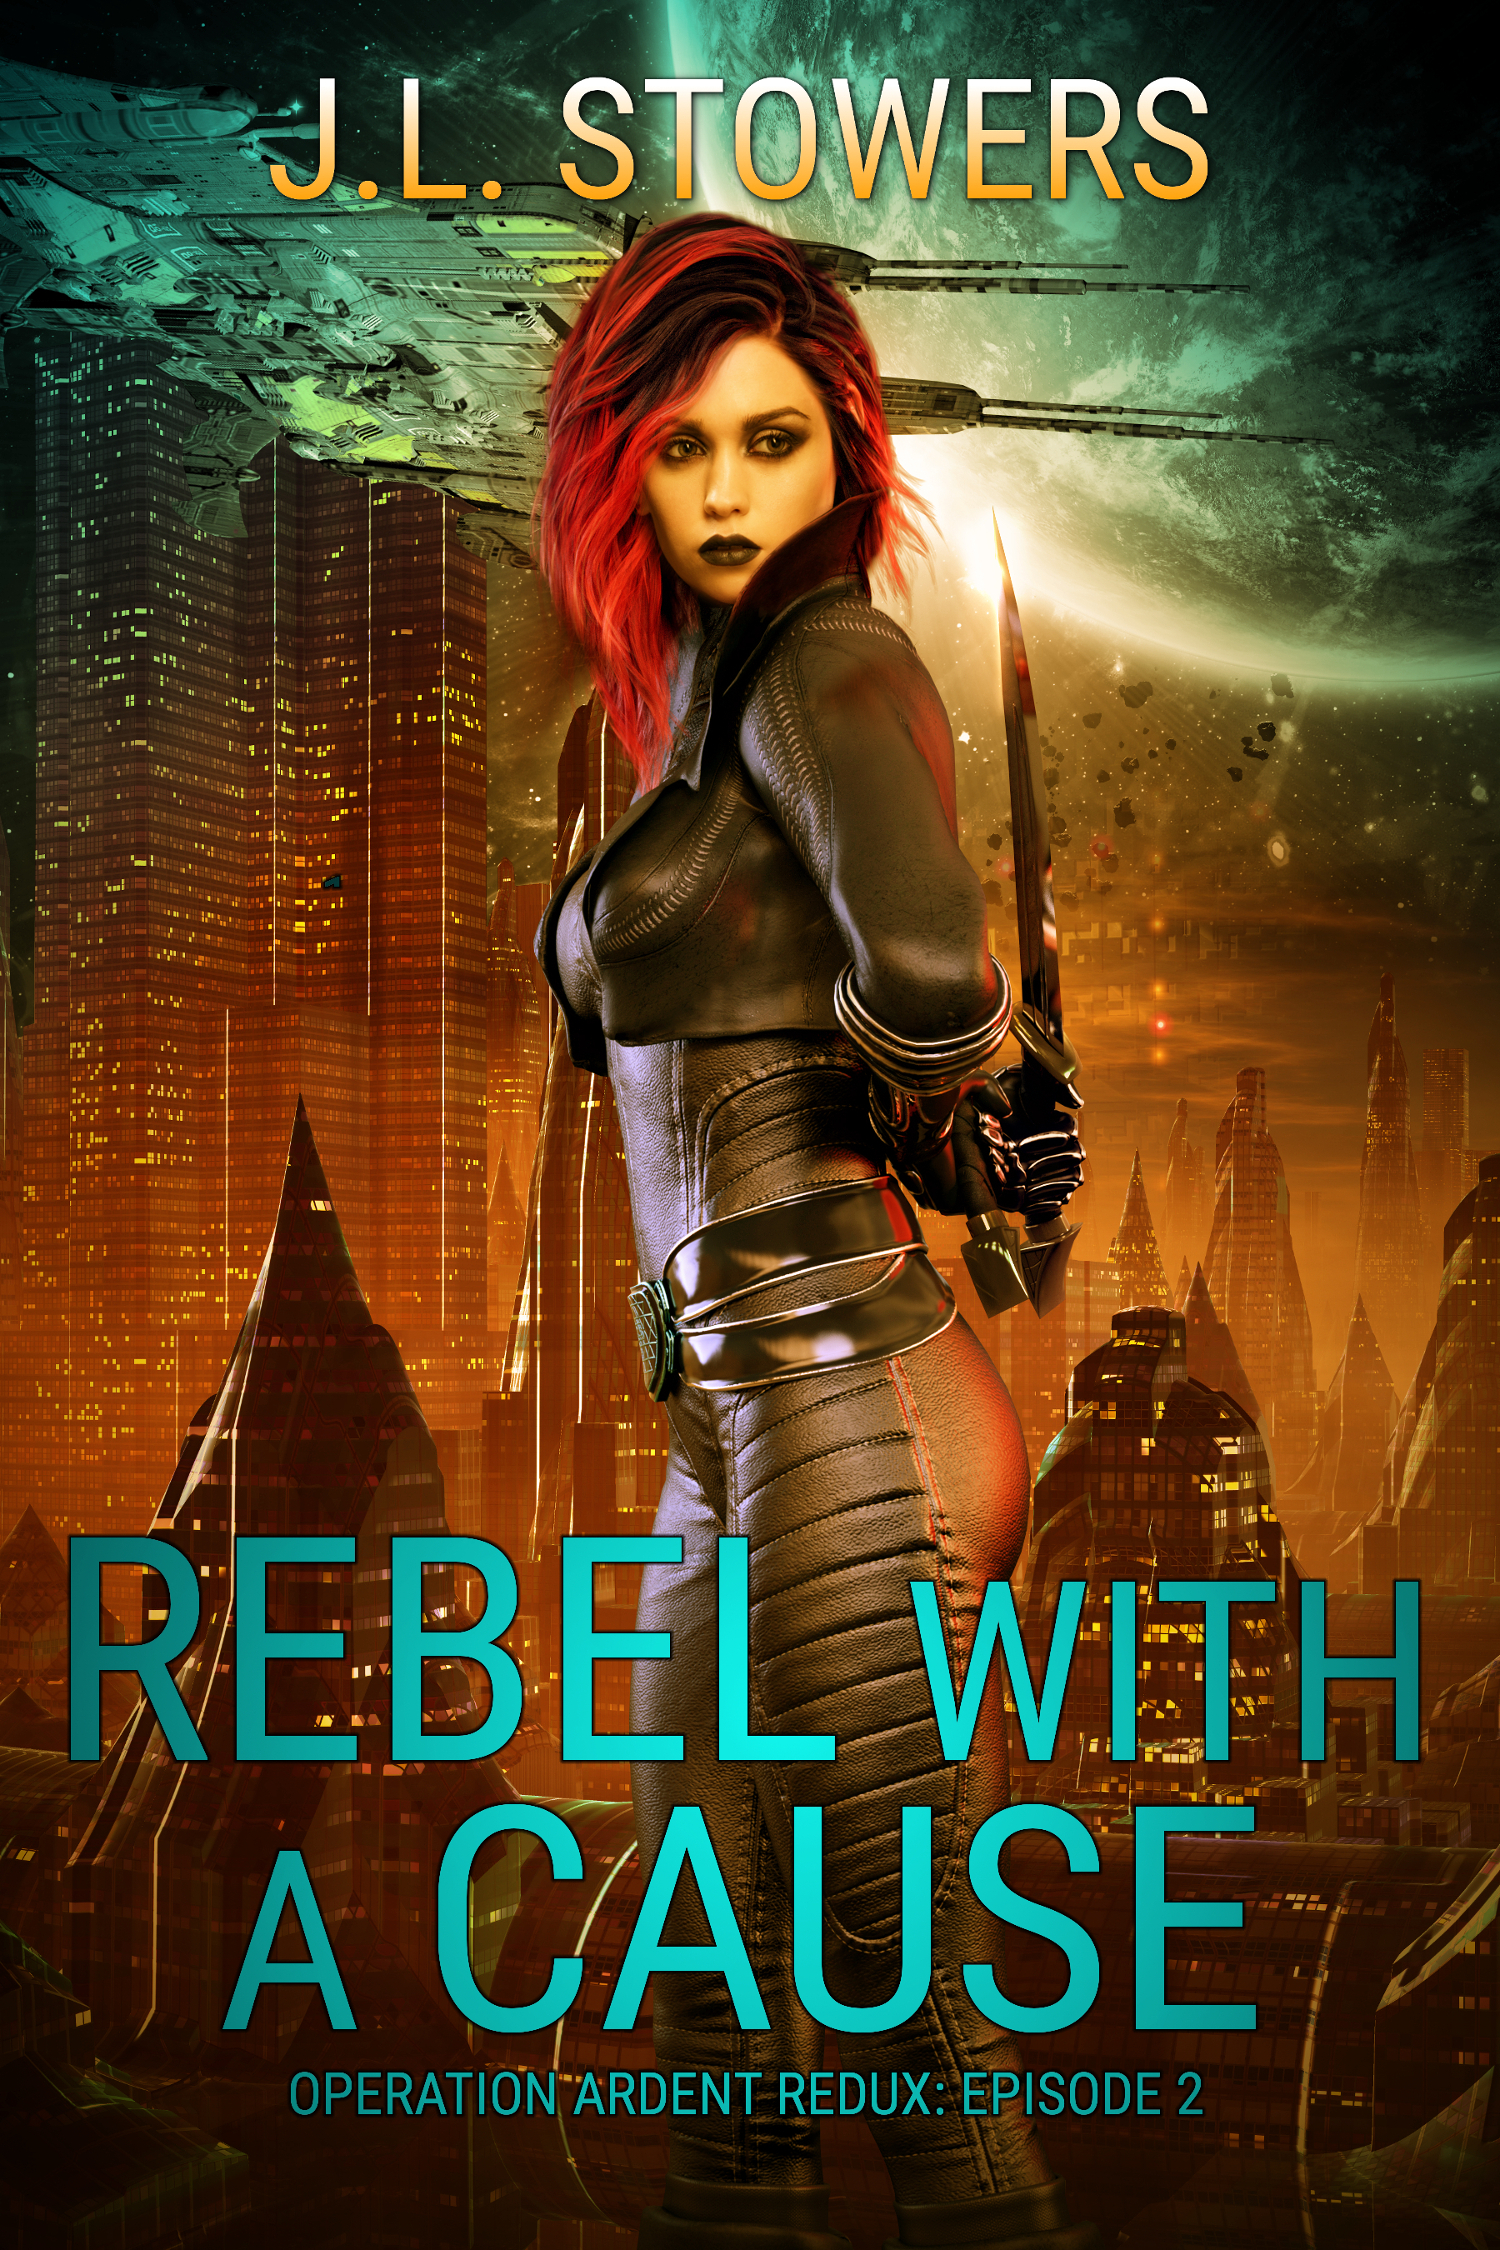 Rebel with a Cause: Operation Ardent Redux: Episode 2 by Science Fiction Author J. L. Stowers